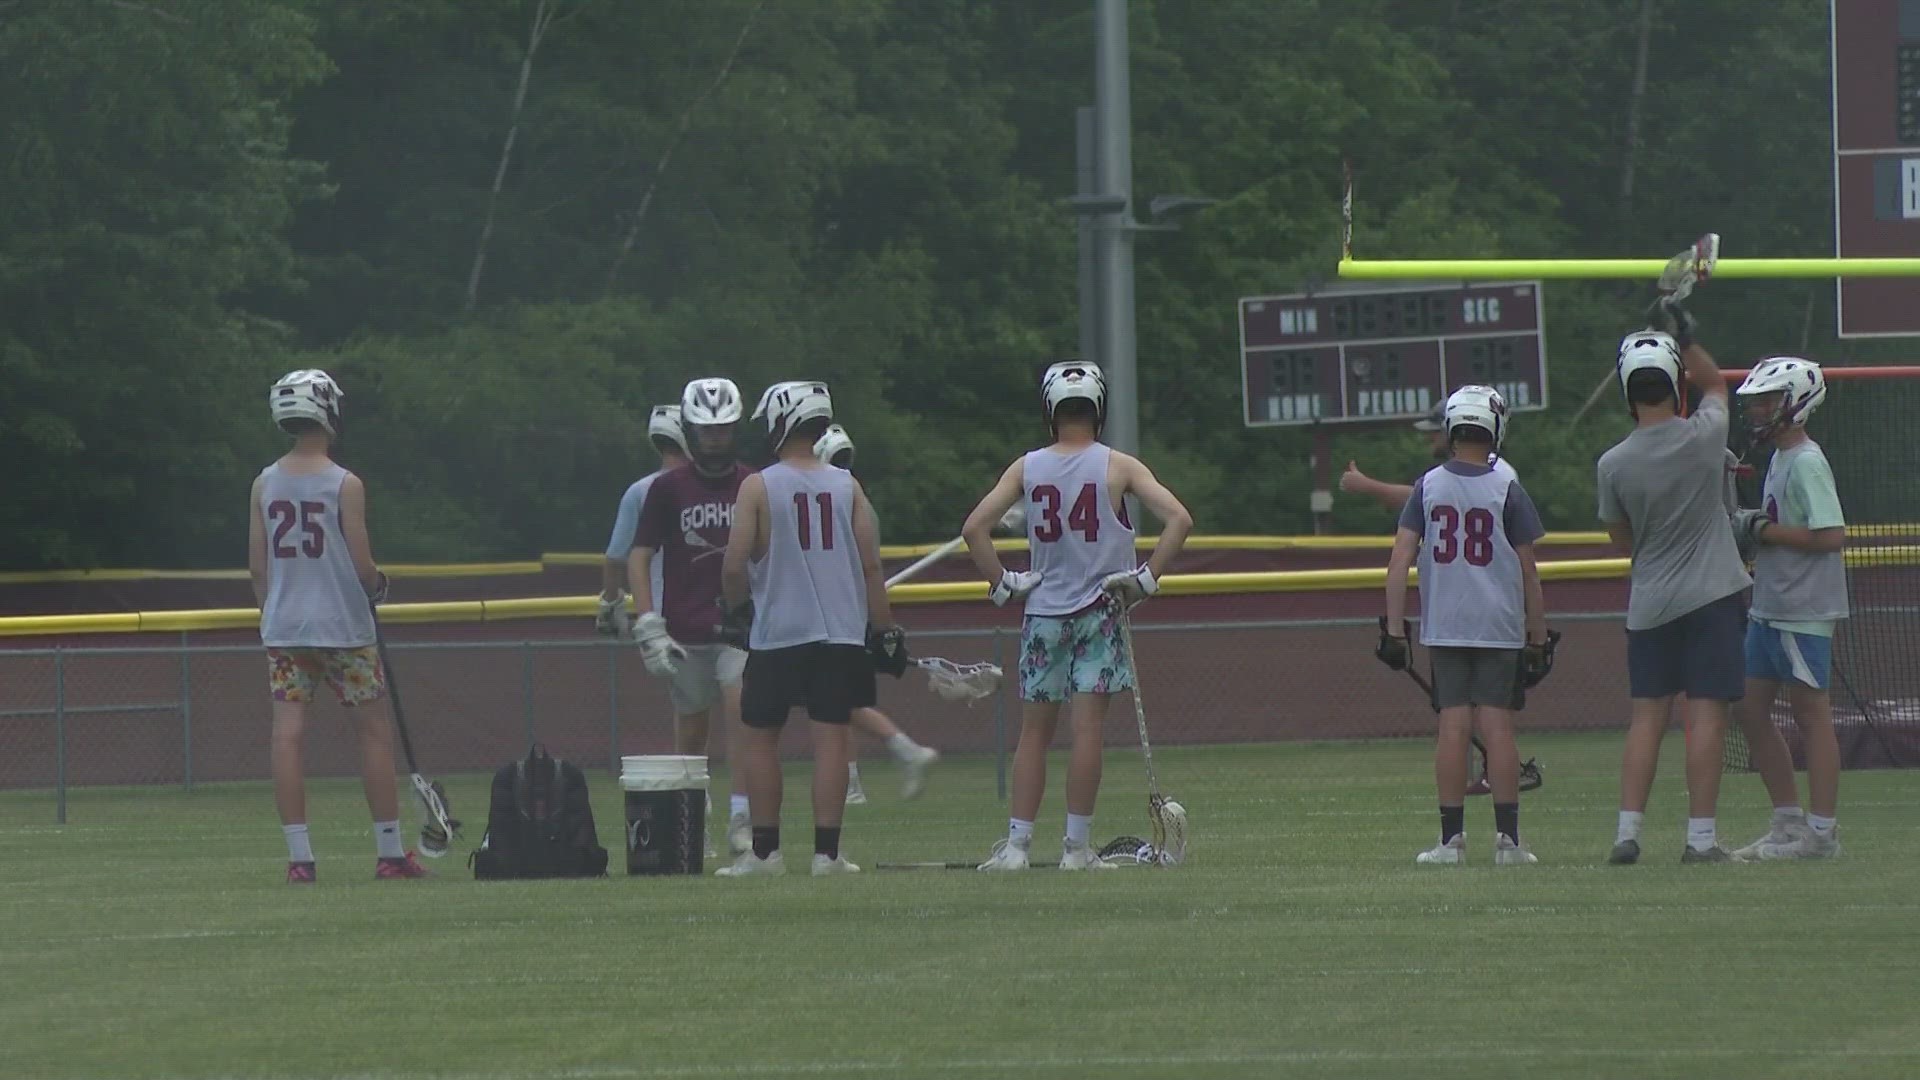 Players on the varsity boys' lacrosse team said they were kicked off the team after protesting "harassment and verbal abuse" from their coach.